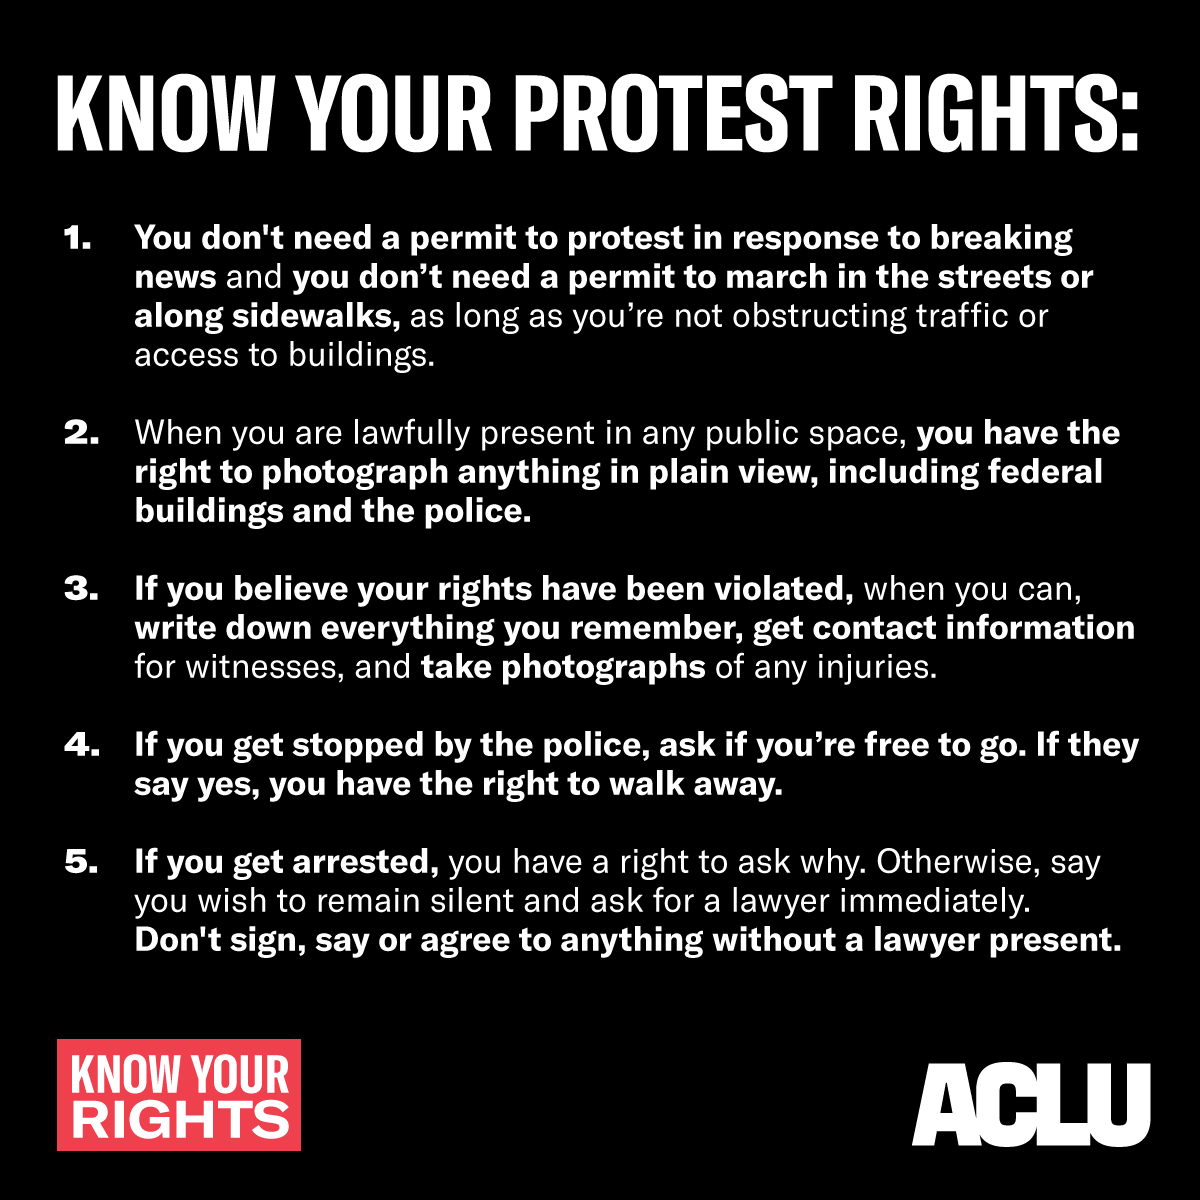 Protesting today? Know your rights.